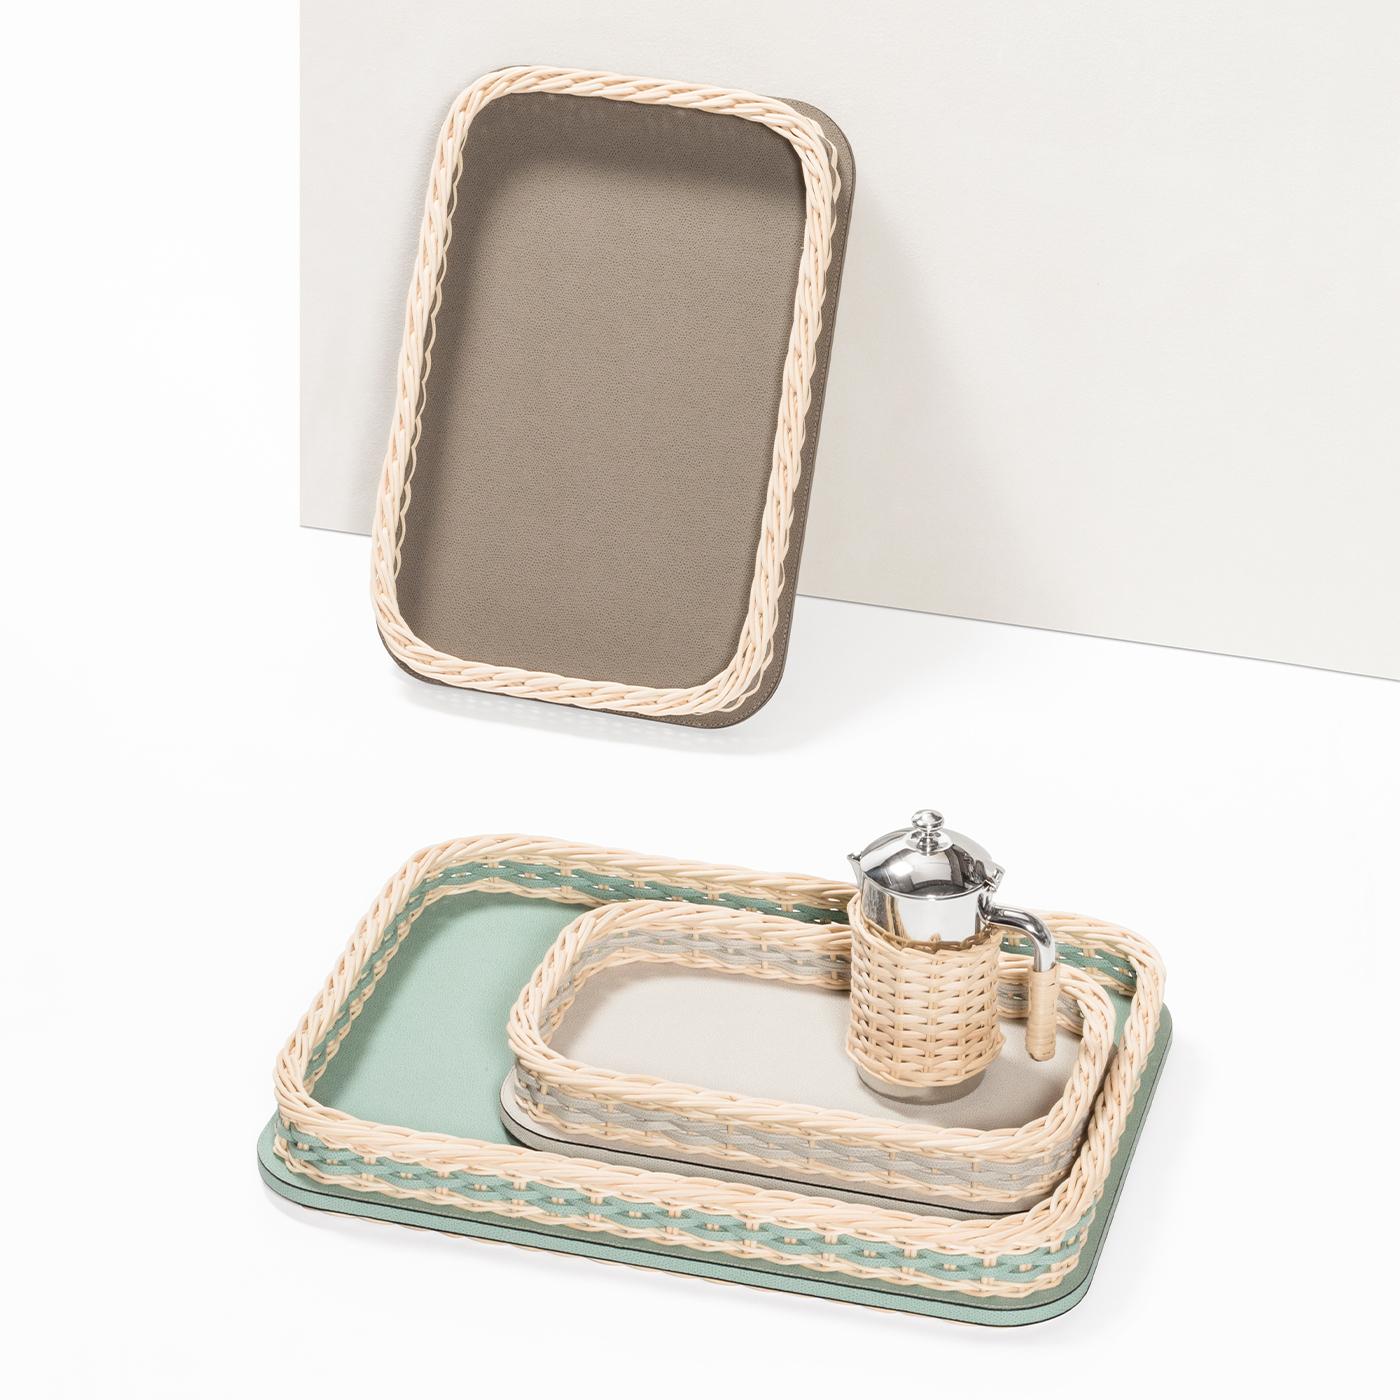 Italian Orsay Beige Leather and Rattan Rectangular Mini Tray For Sale